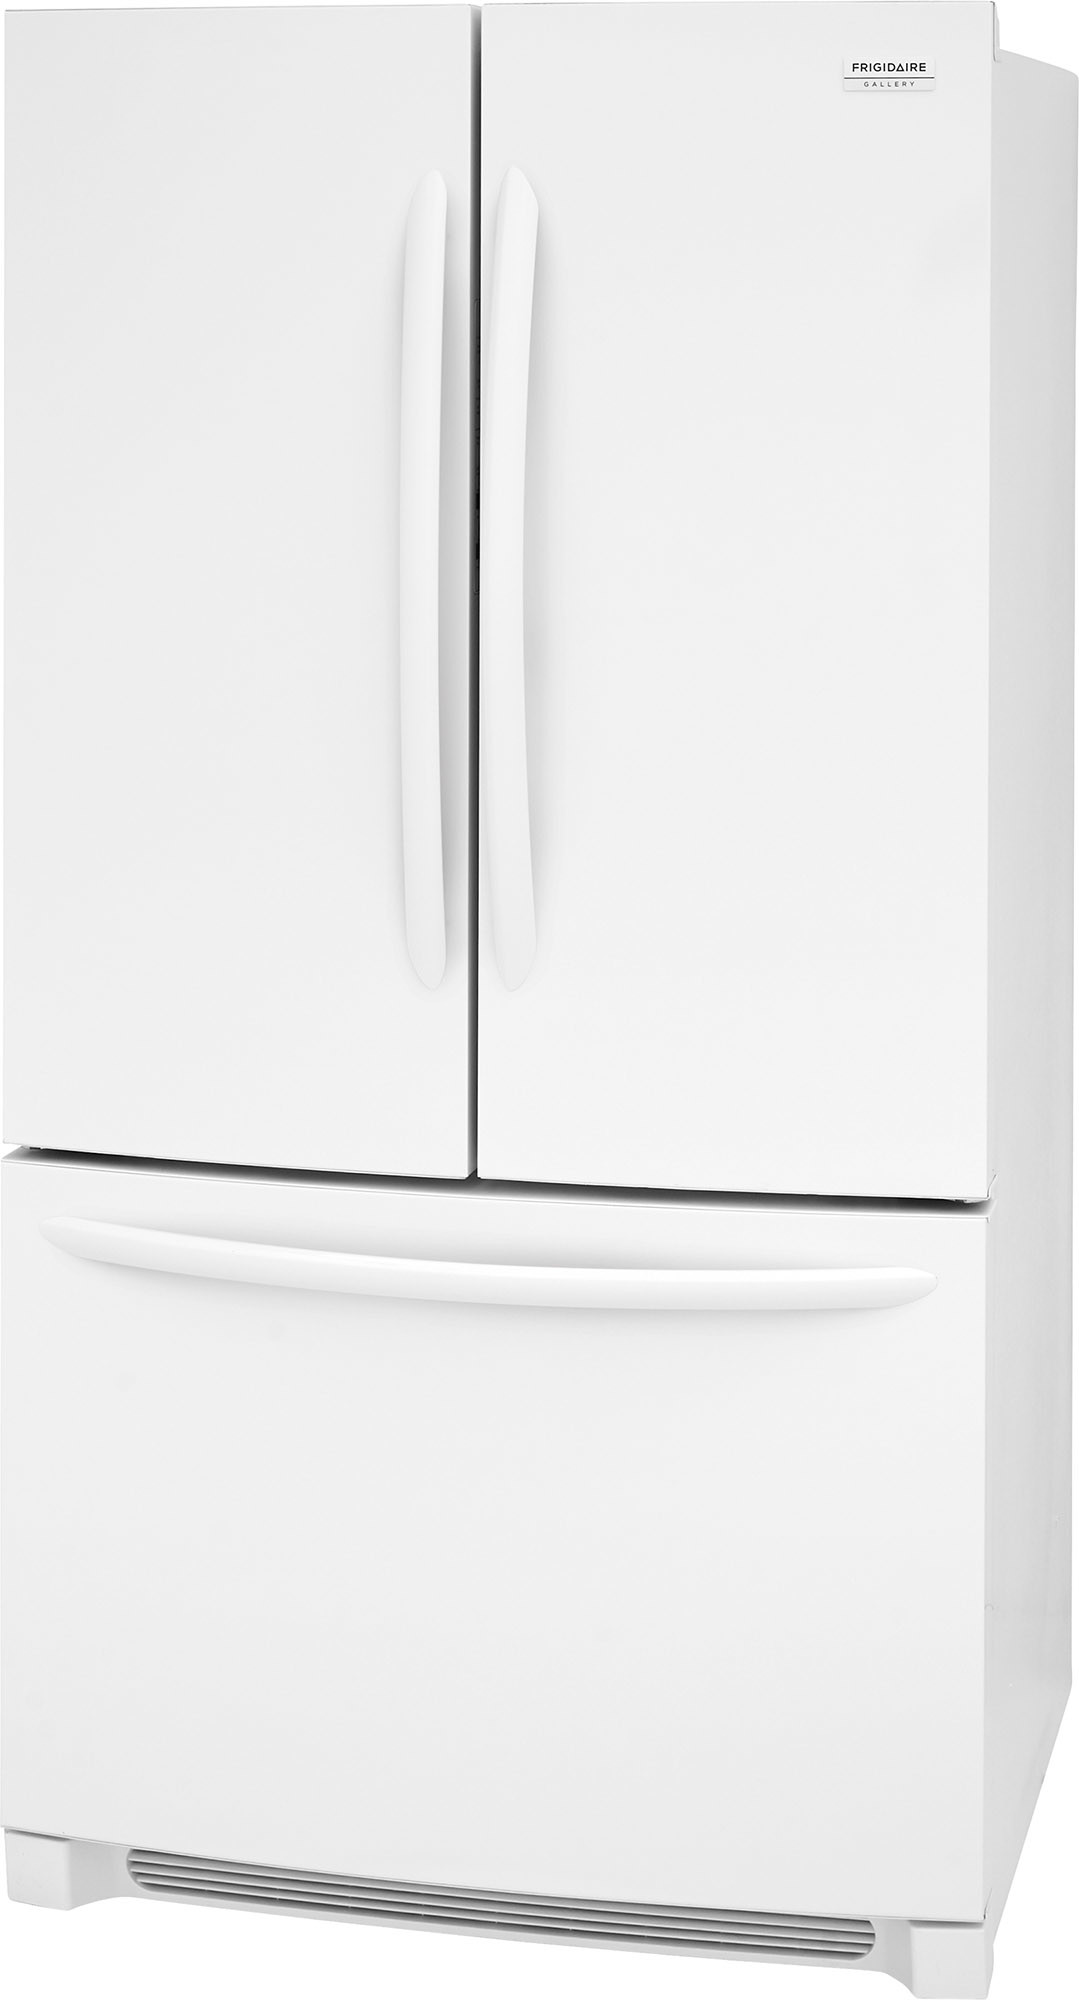 Frigidaire Gallery FGHN2868TF 28 Cu. Ft. Stainless French Door Refrigerator - image 5 of 7